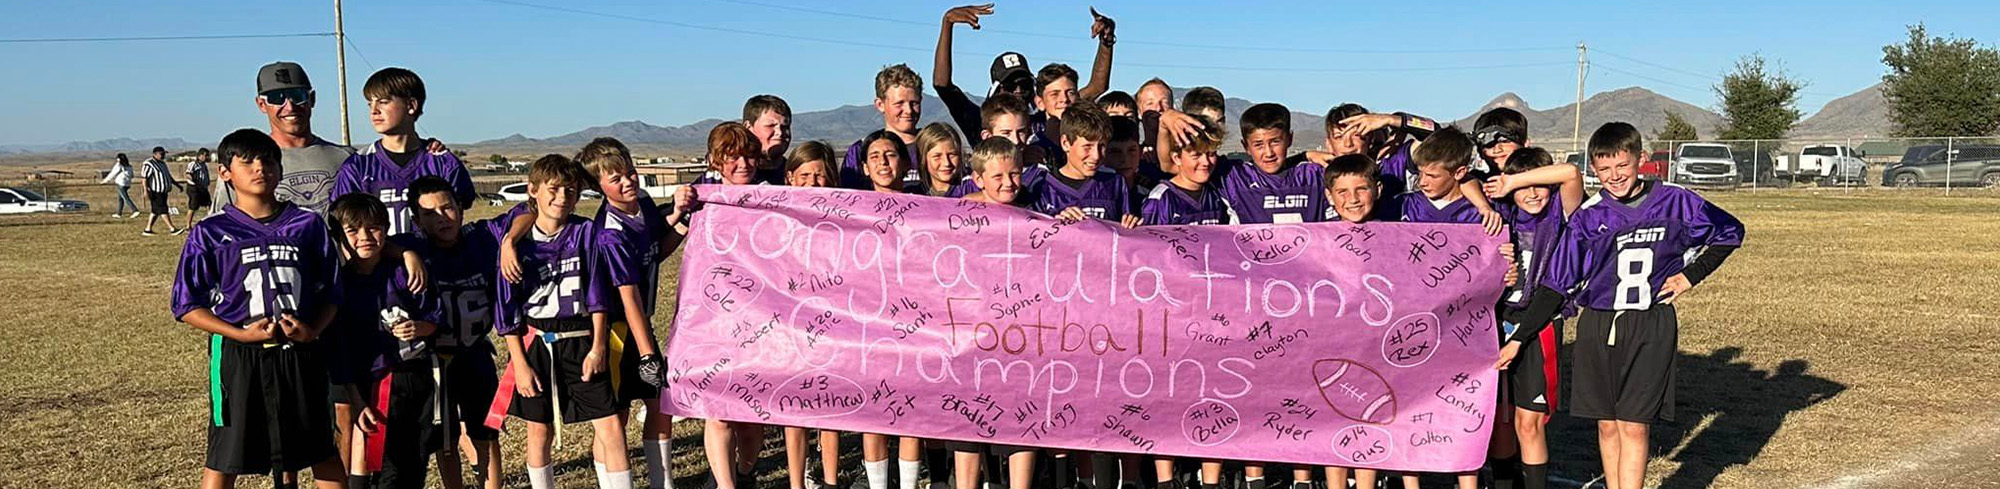 Sonoita football team posing together behind sign the reads congratulations football champions